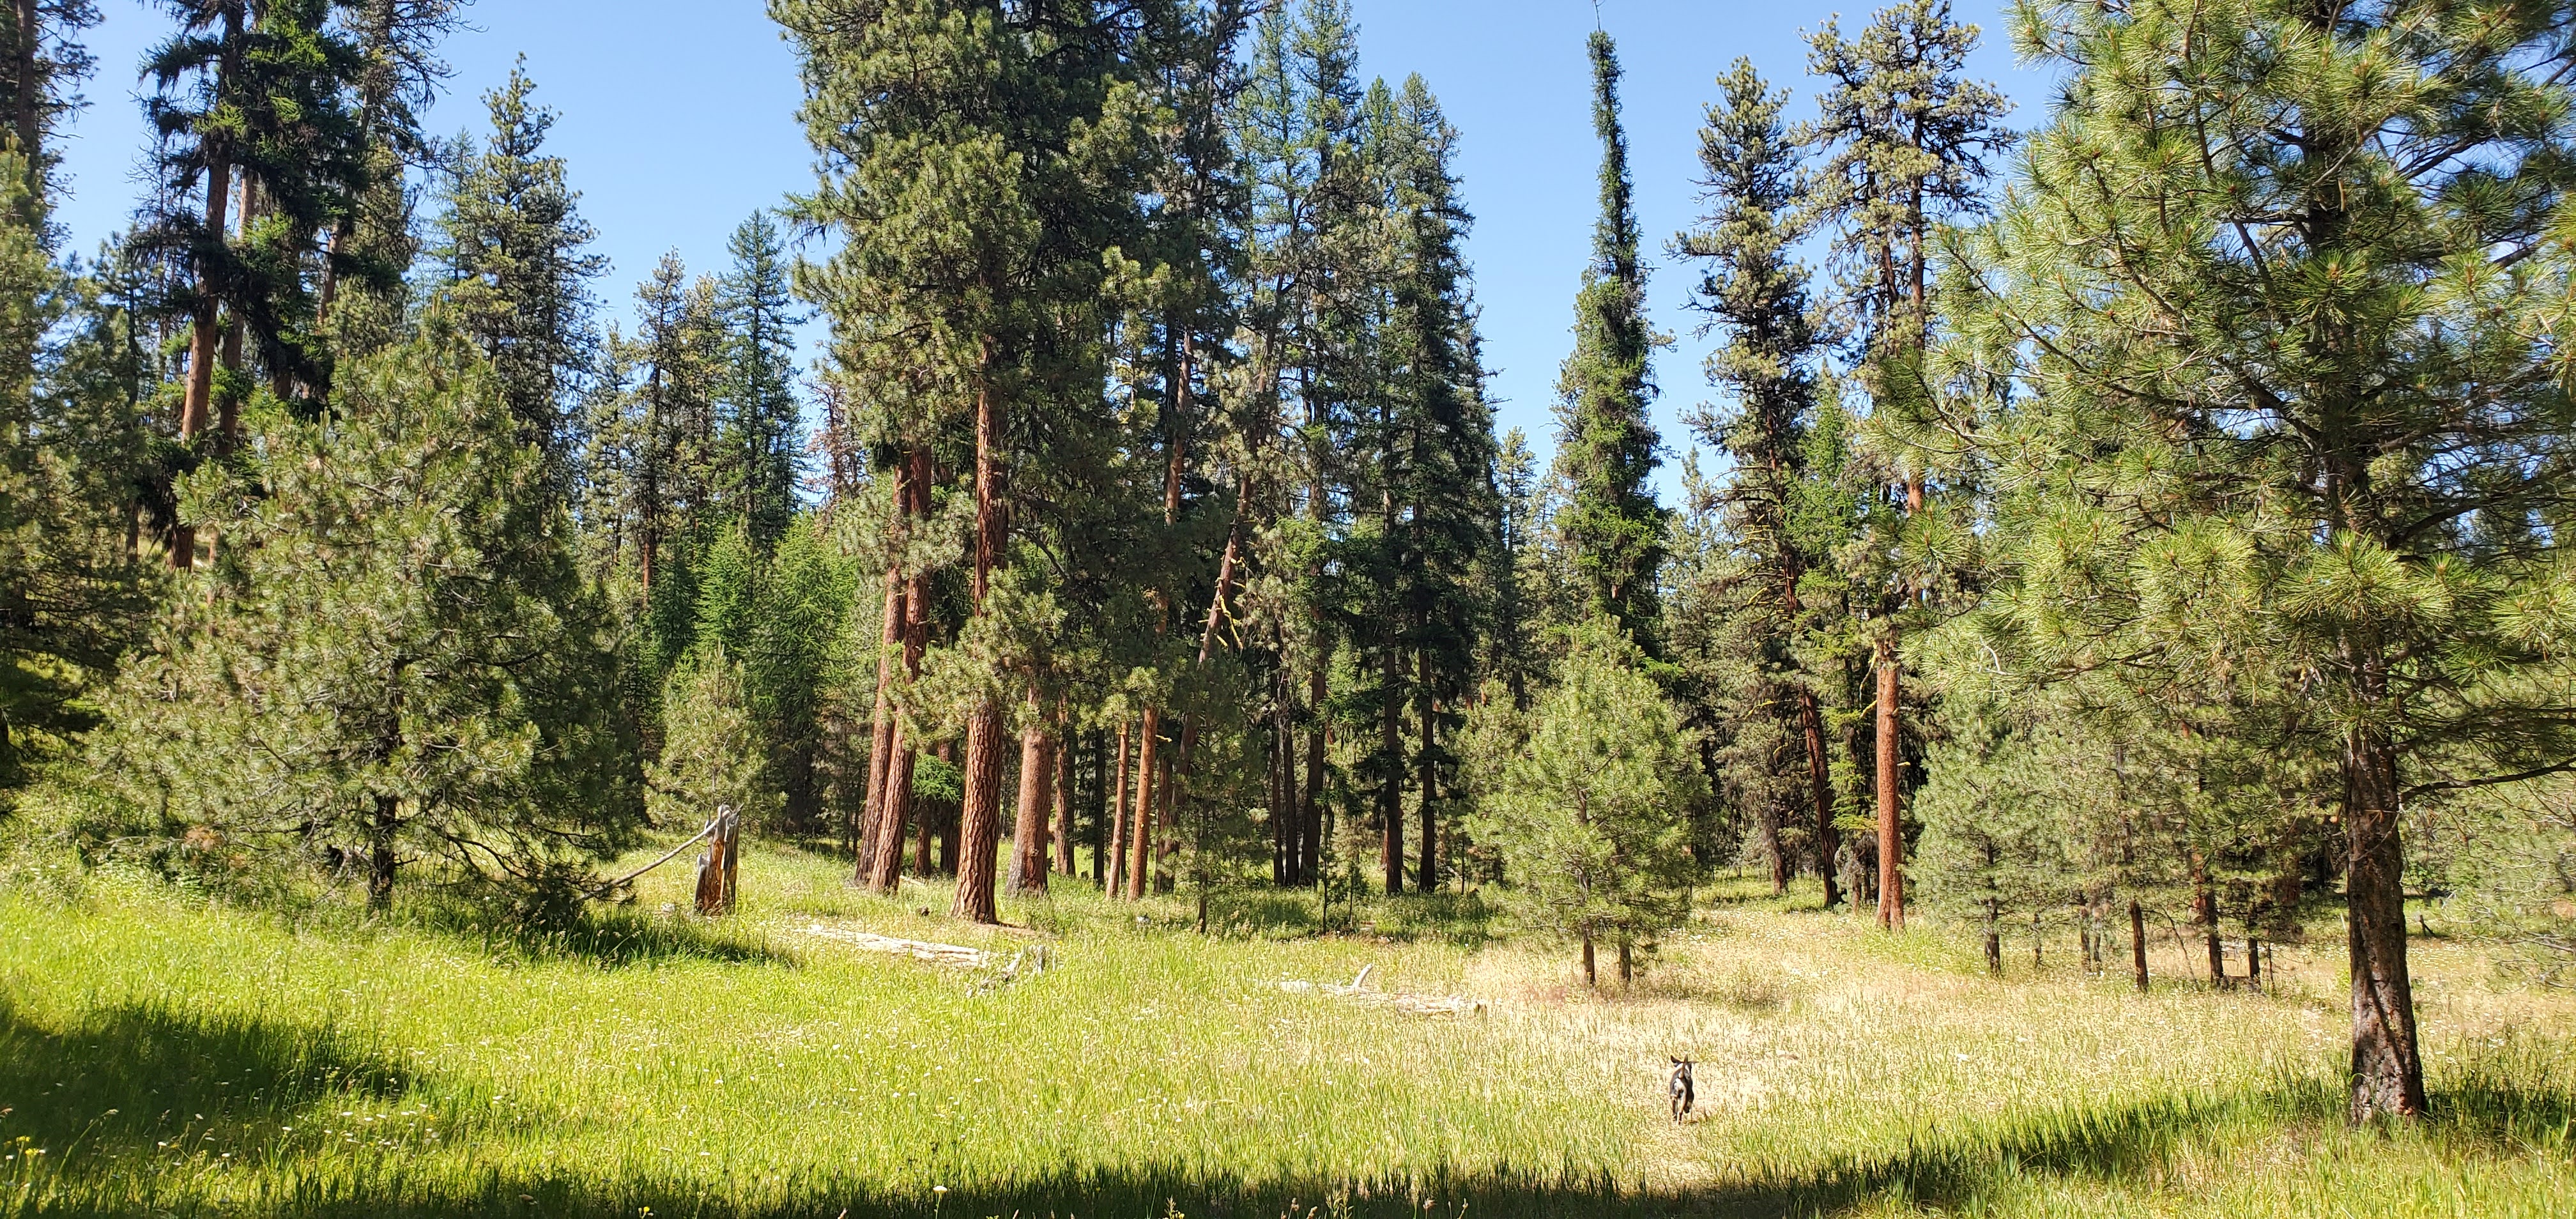 Black Mountain Project Area in the Ochoco National Forest